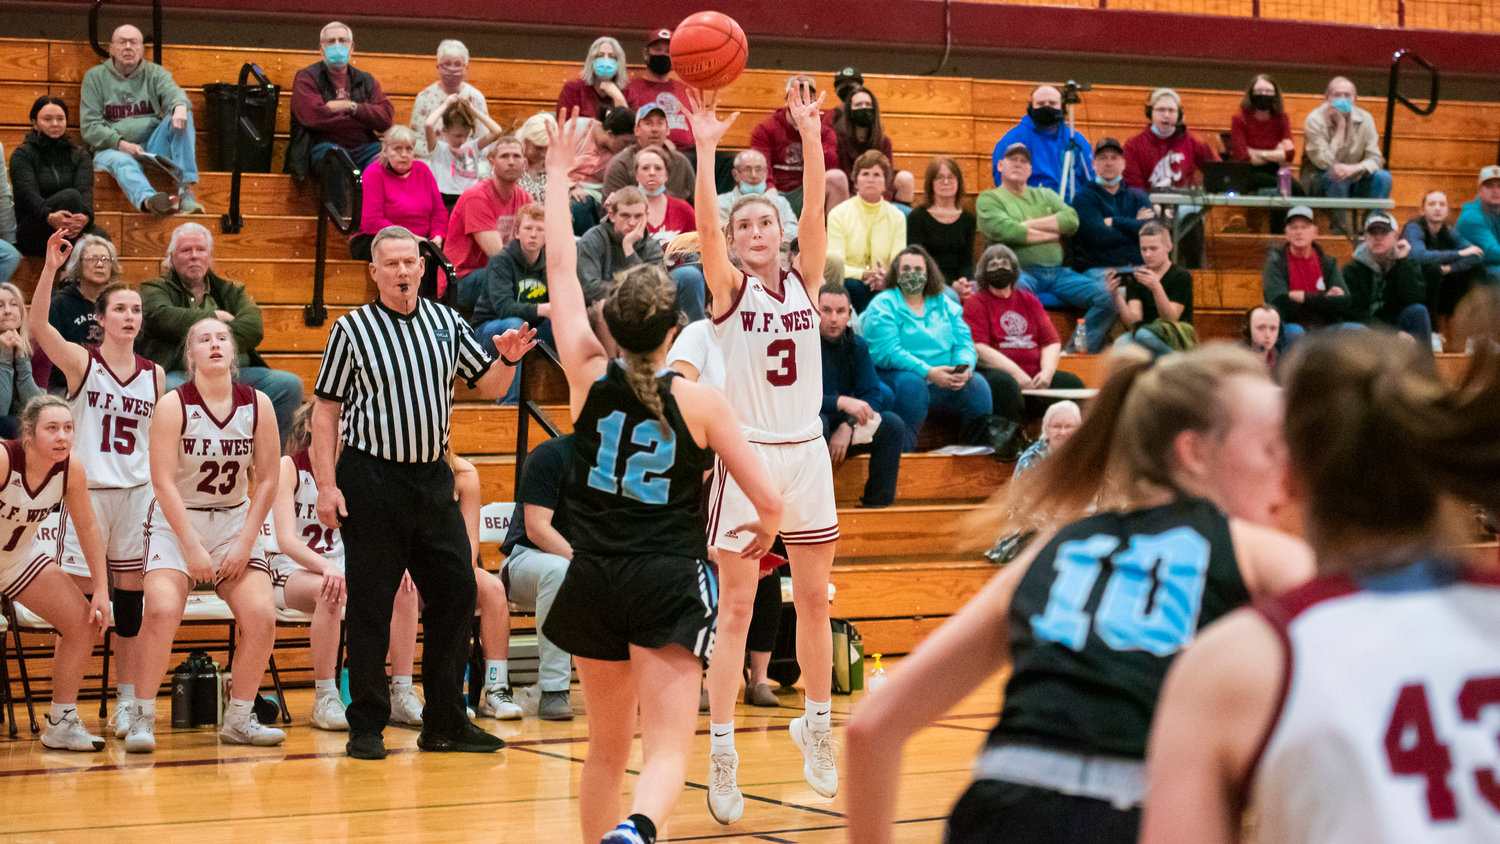 W.F. West senior Lexi Roberts (3) shoots from deep during a game Friday night in Chehalis.